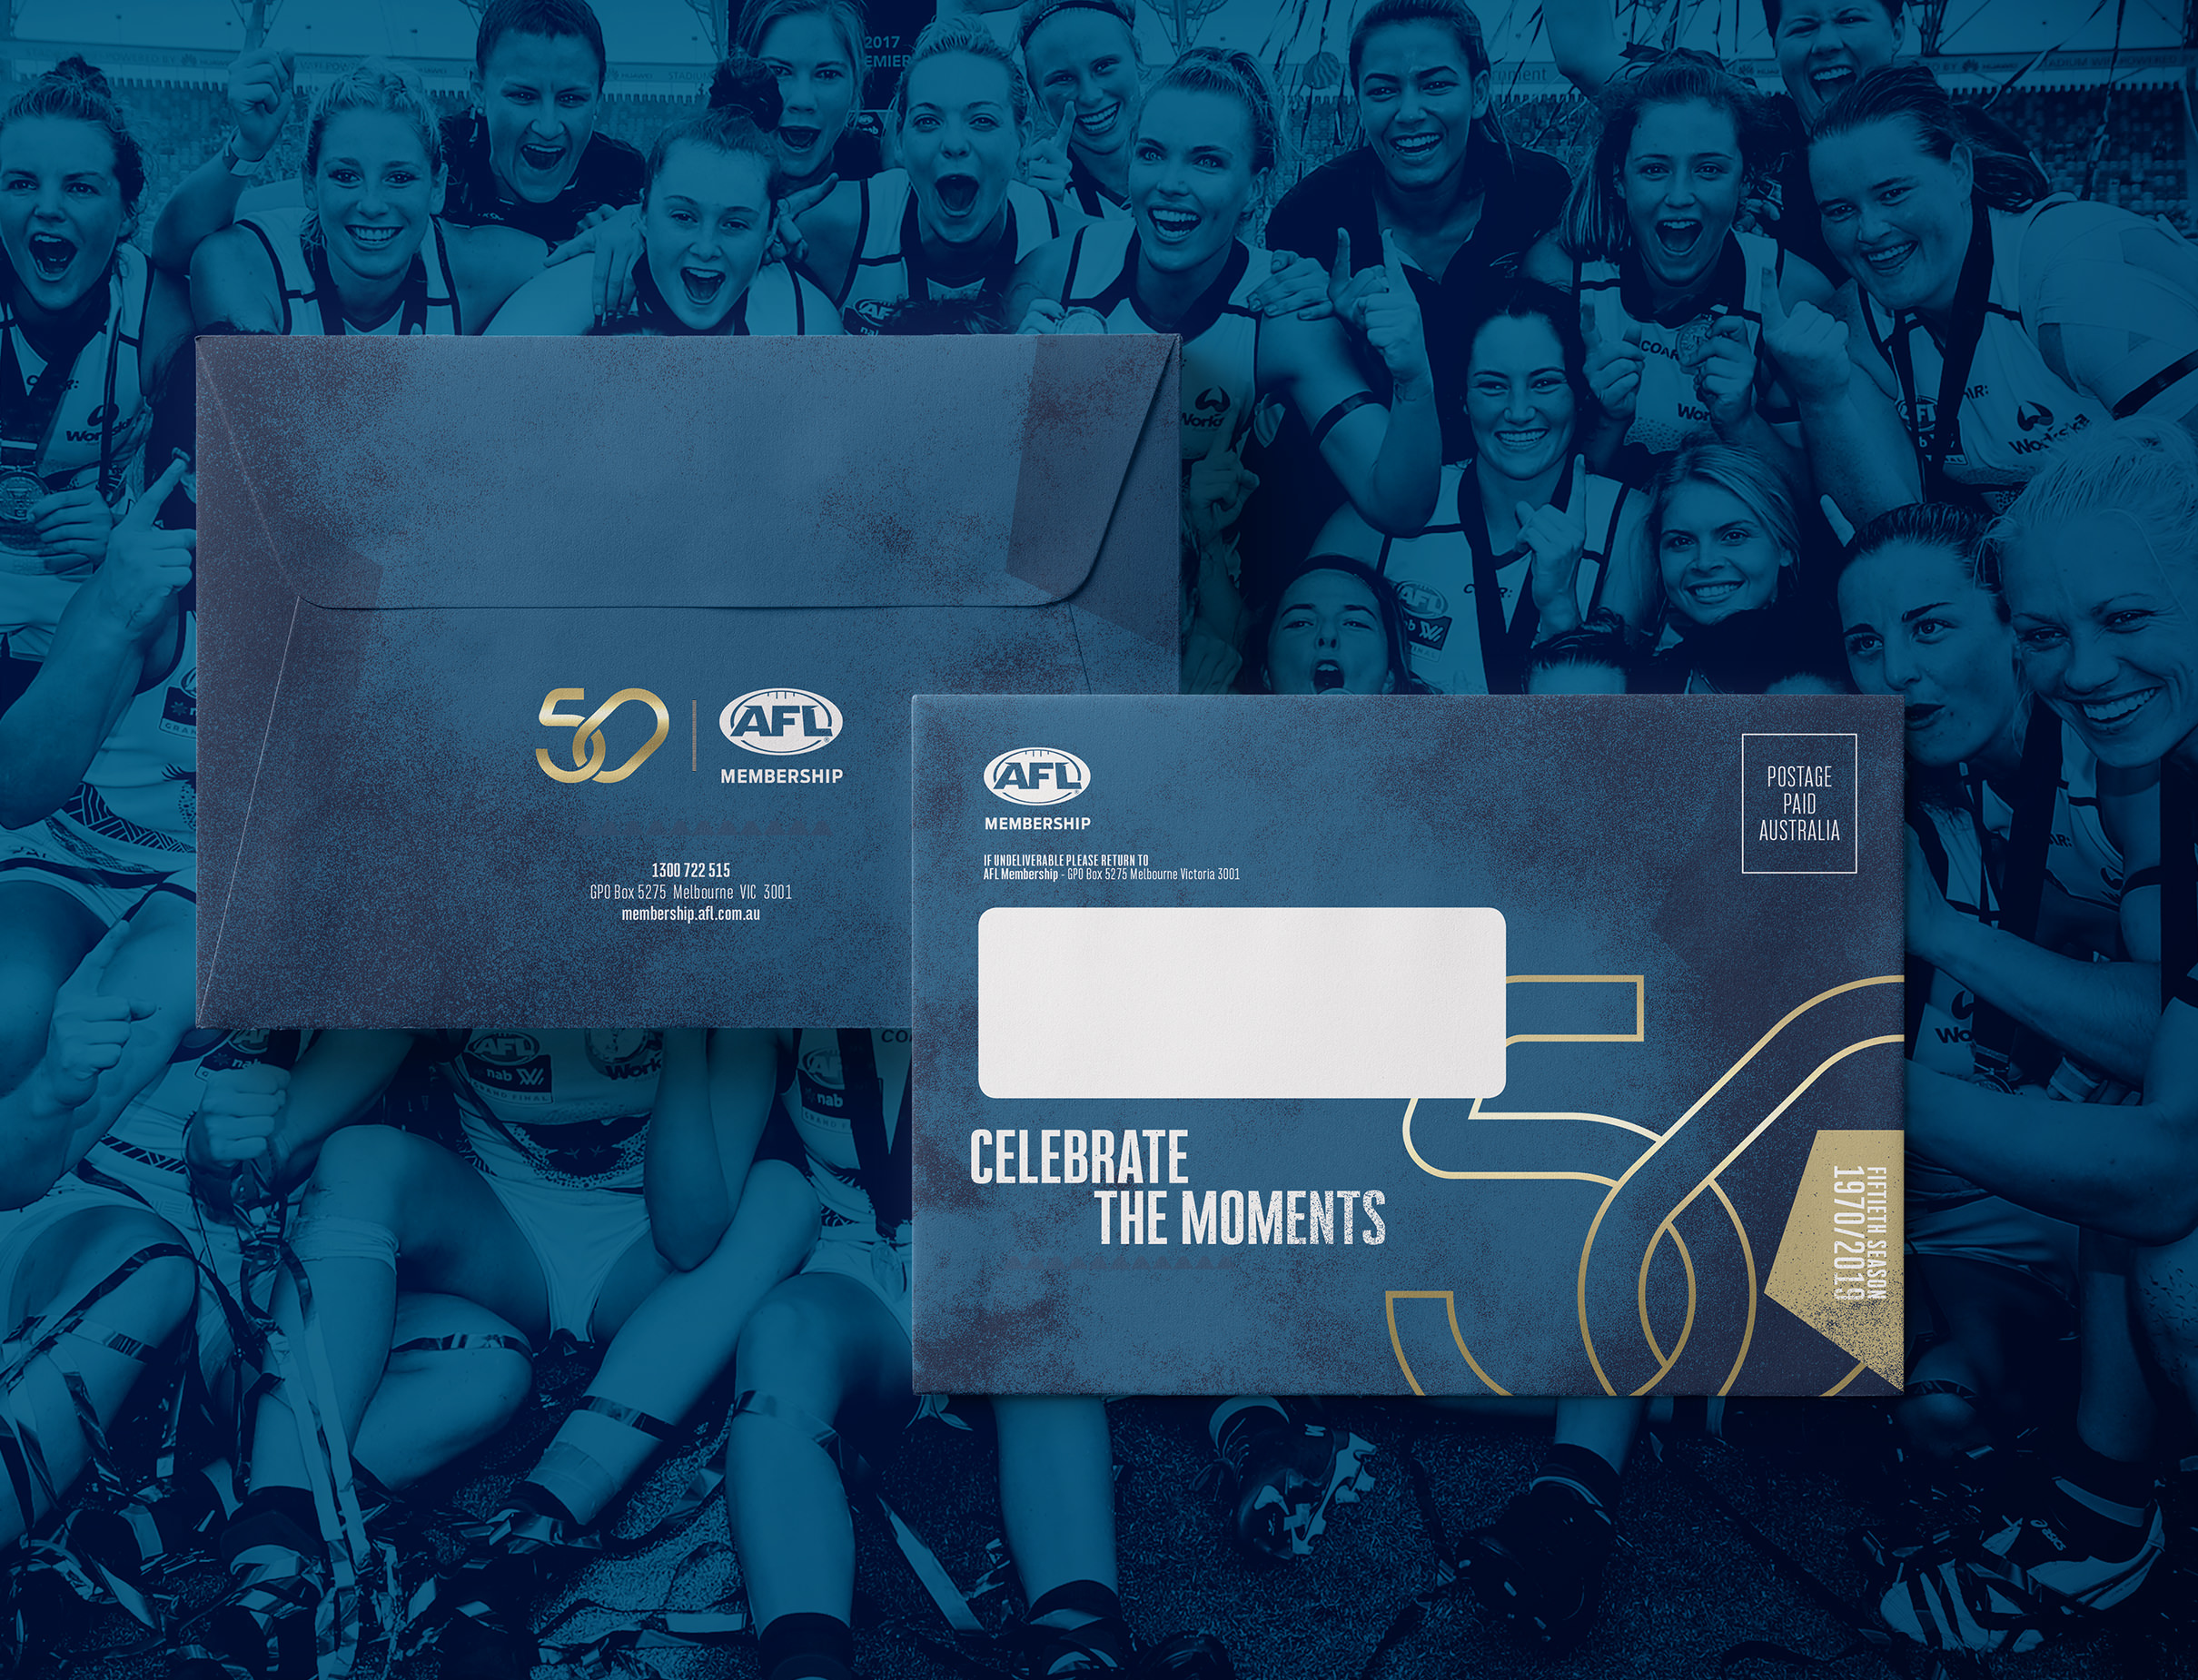 AFL_IMAGE-BANNER-BLOCK_ONE-ROW_2420x1850